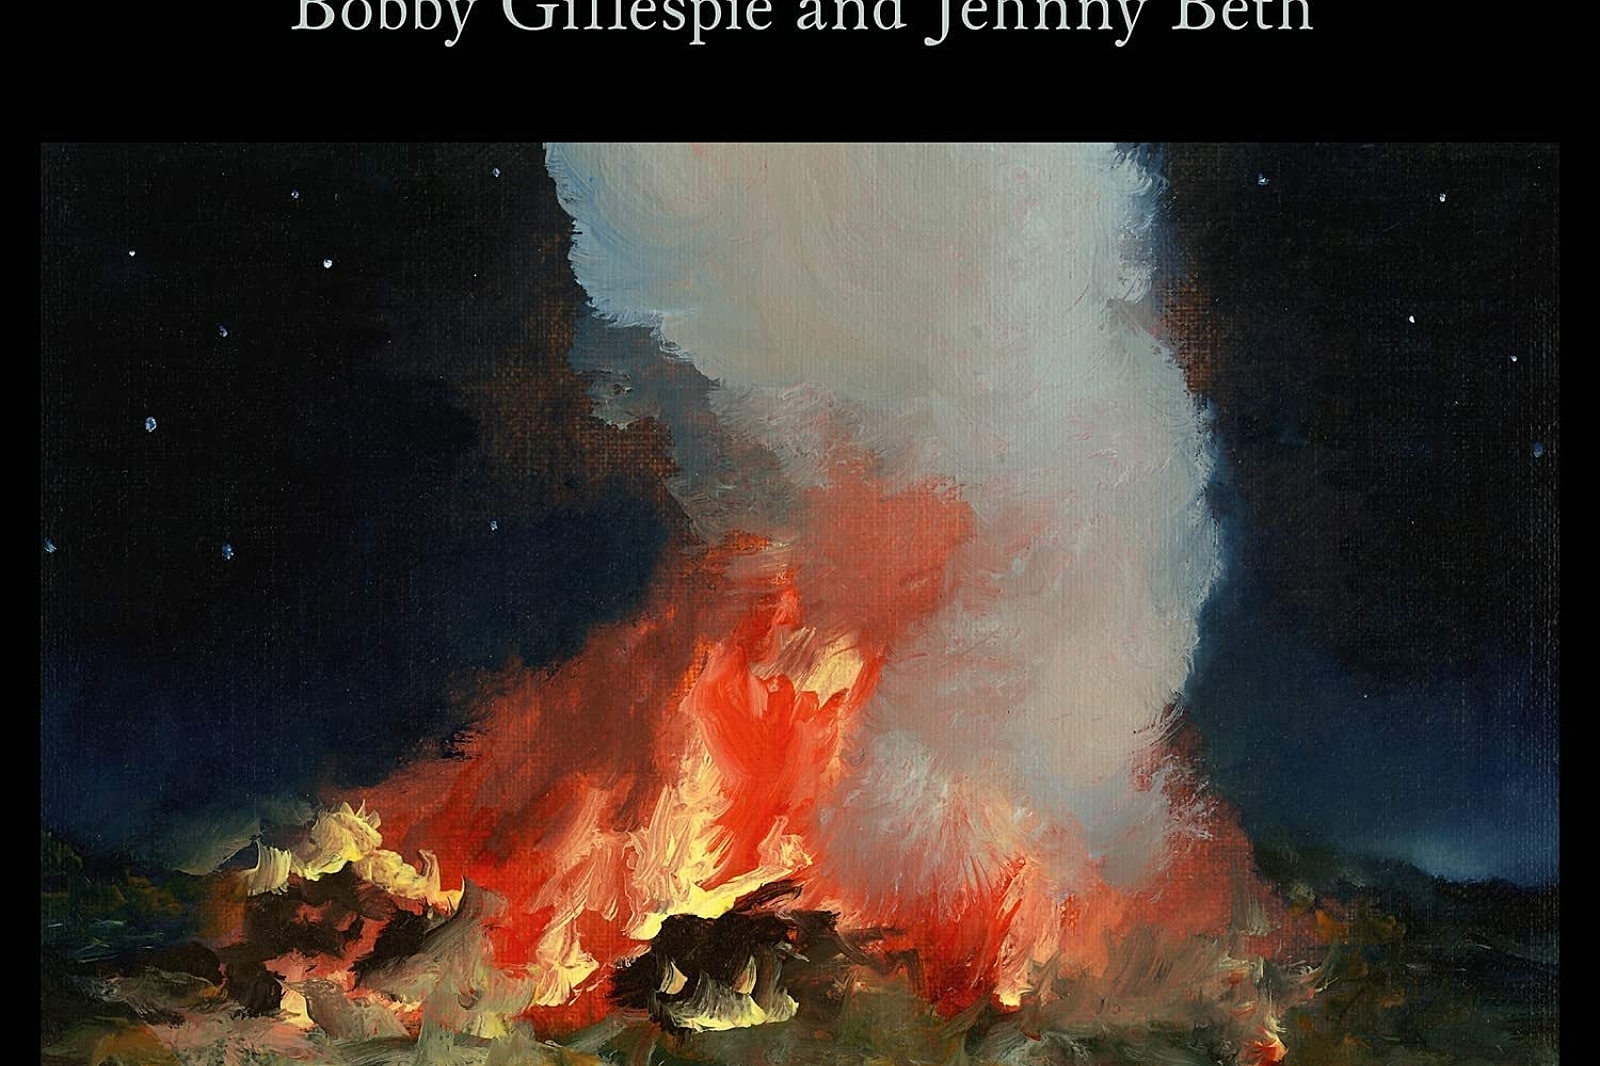 Bobby Gillespie and Jehnny Beth - Utopian Ashes